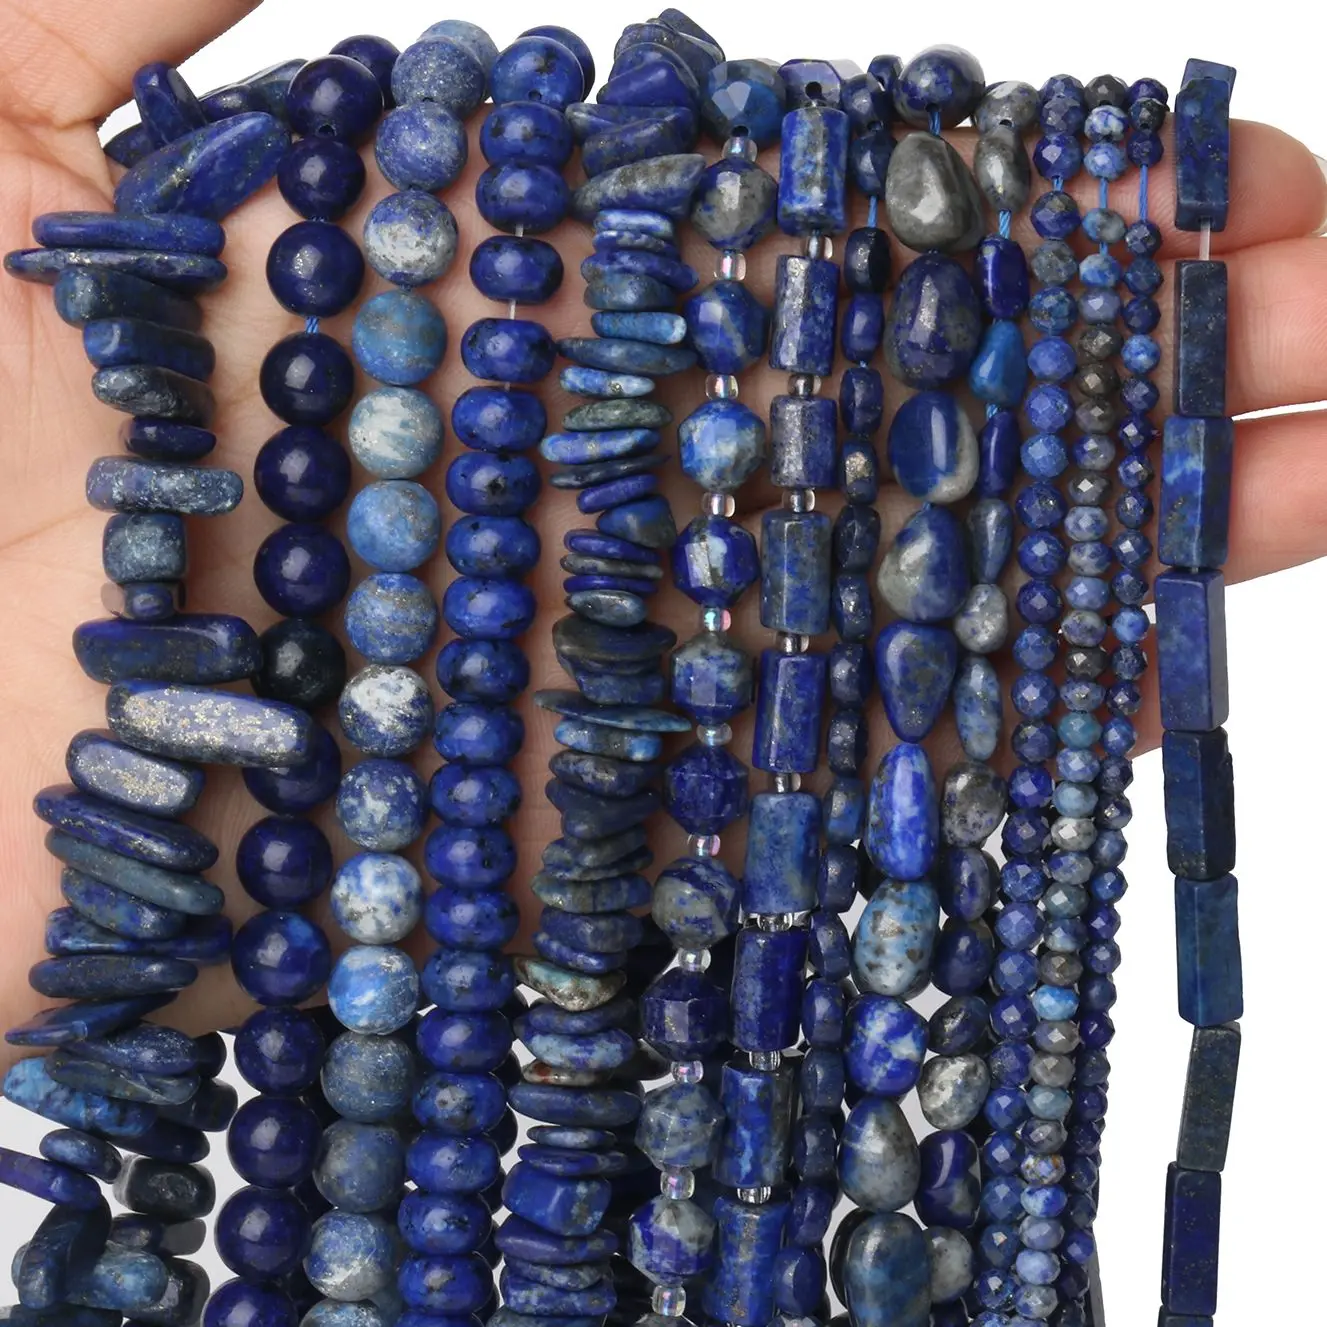 

Trendy 21 Types Natural Stone Blue Lapis Lazuli Beads Round/Faceted/Irregular Loose Beads For Jewelry Making DIY Charm Bracelet